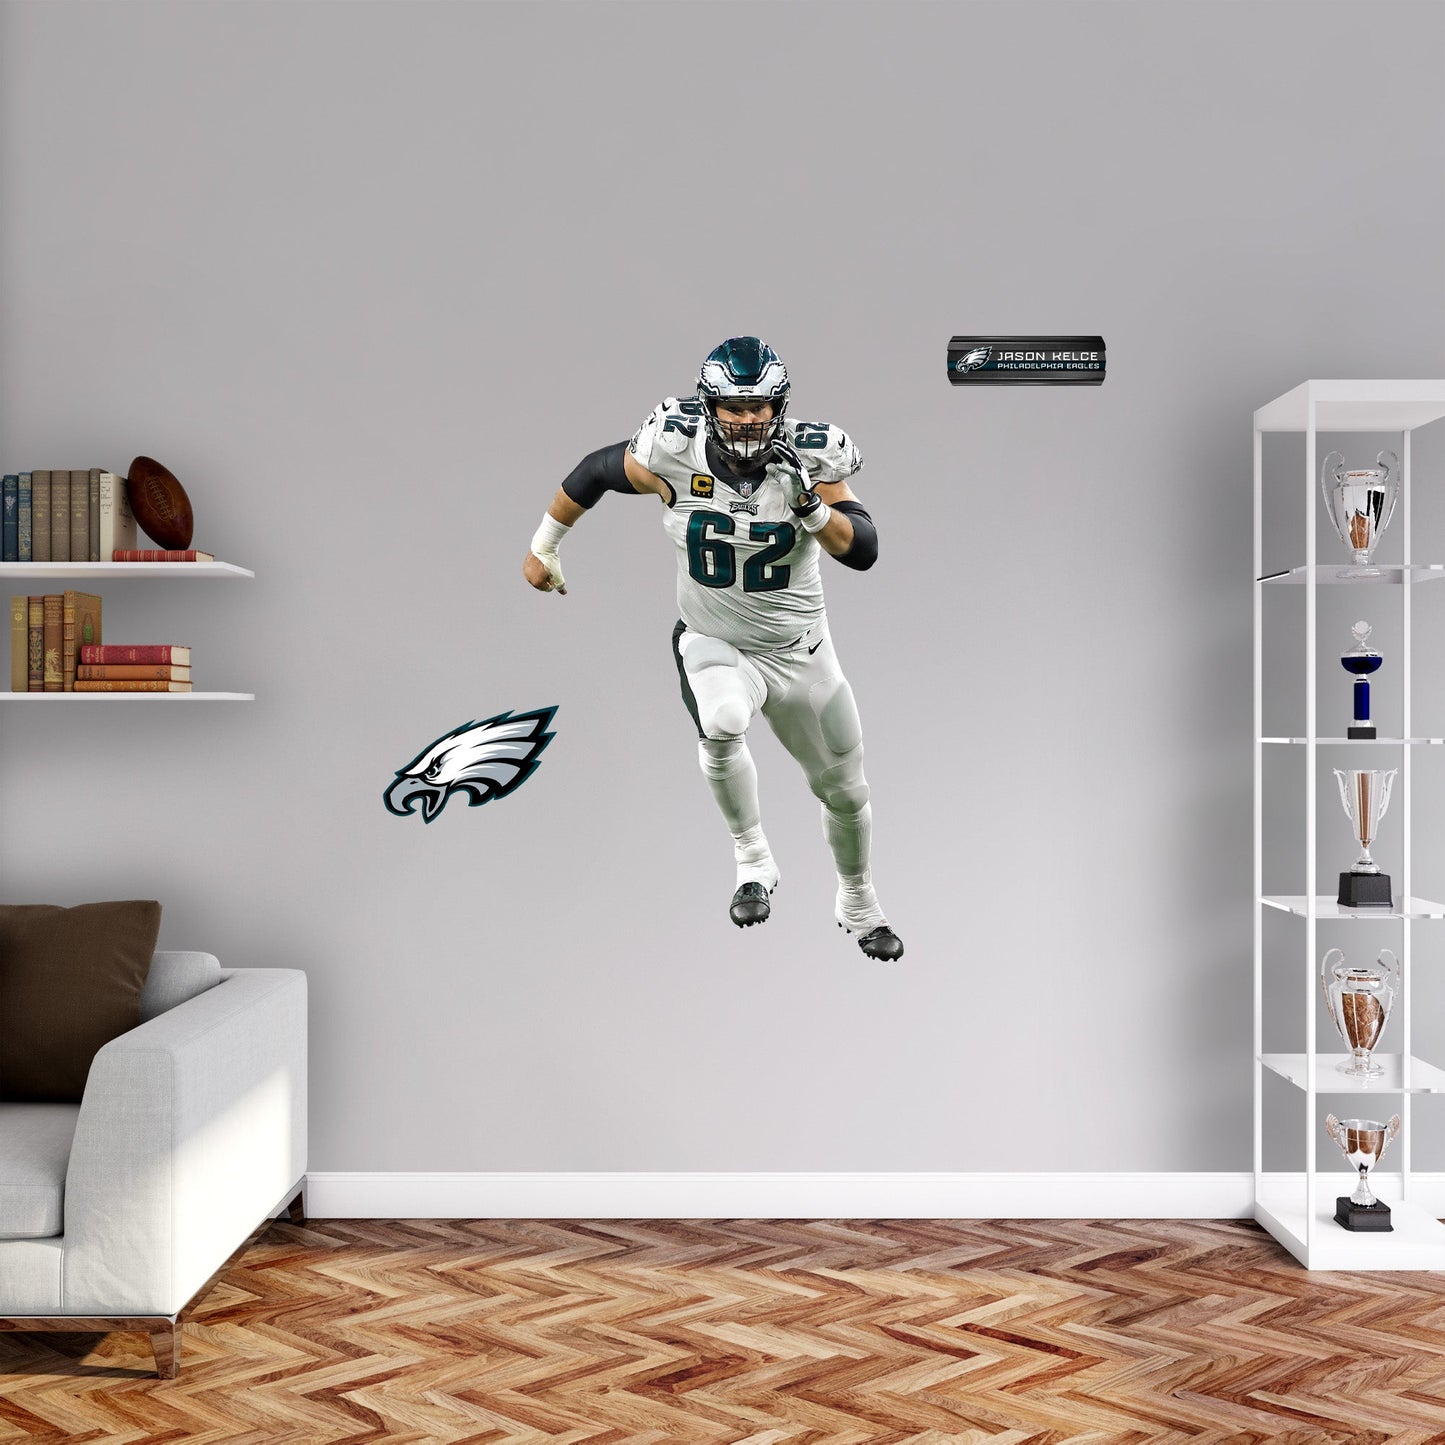 Philadelphia Eagles: Jason Kelce White Jersey - Officially Licensed NFL Removable Adhesive Decal